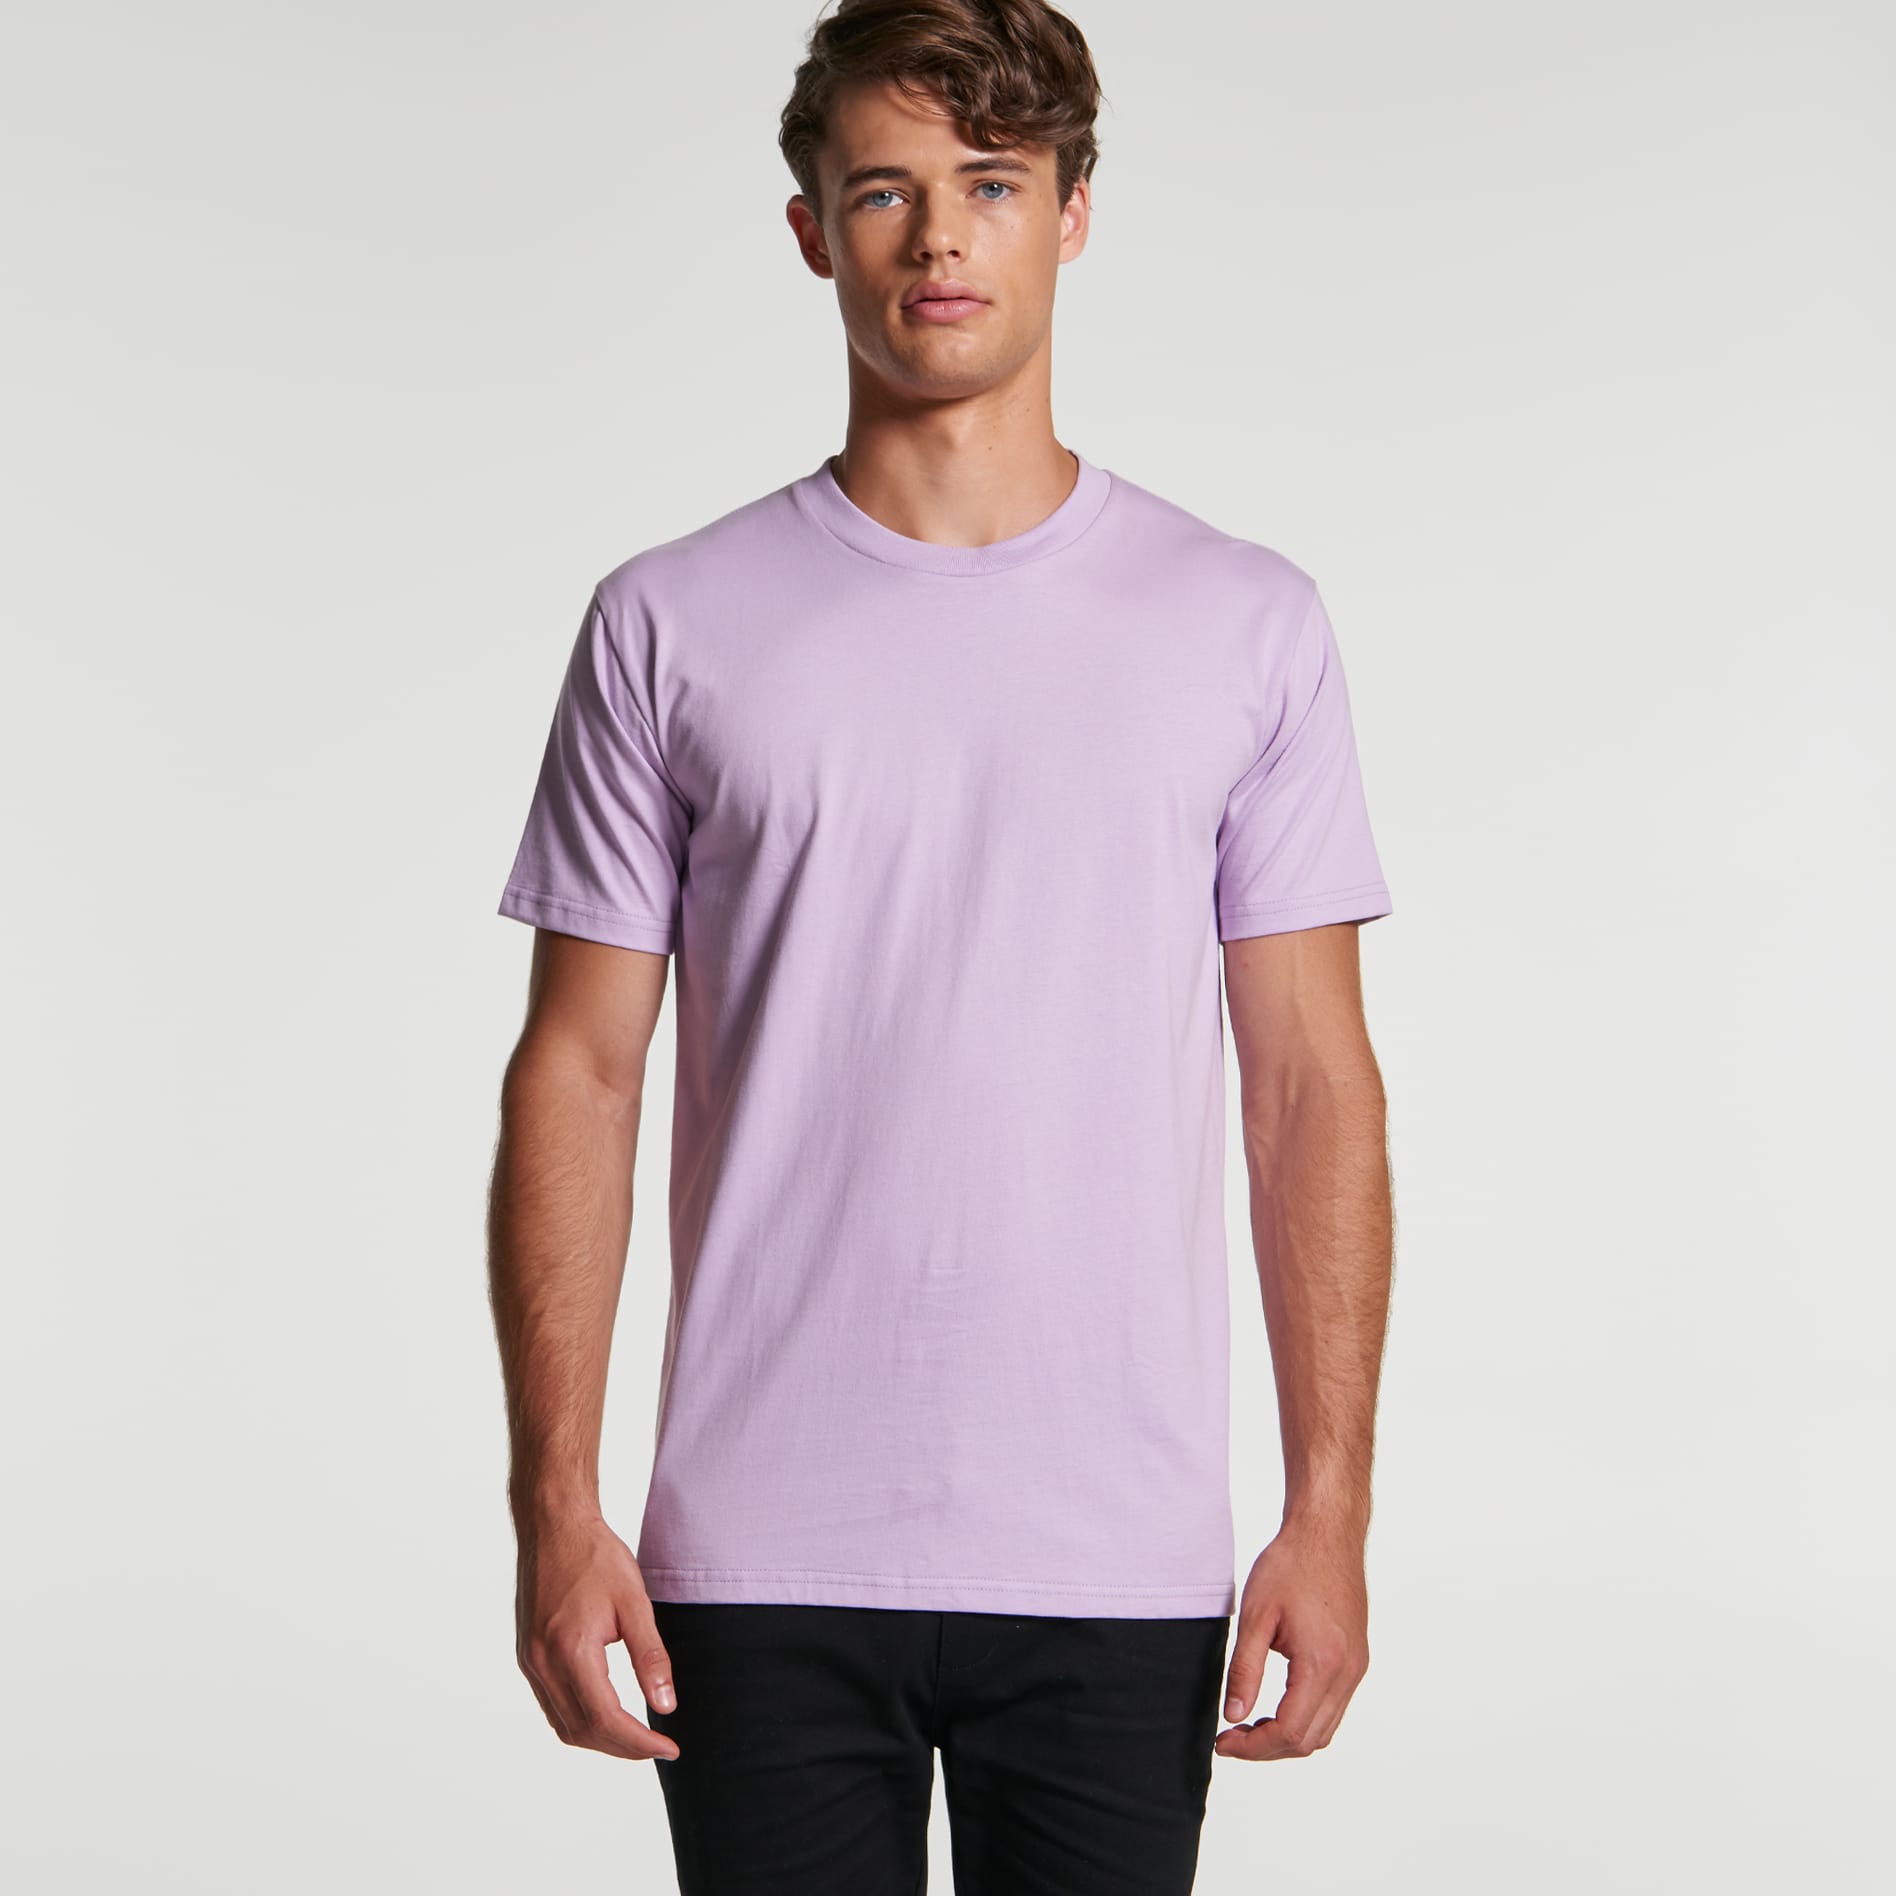 5026_classic_tee_front_lavender.jpg